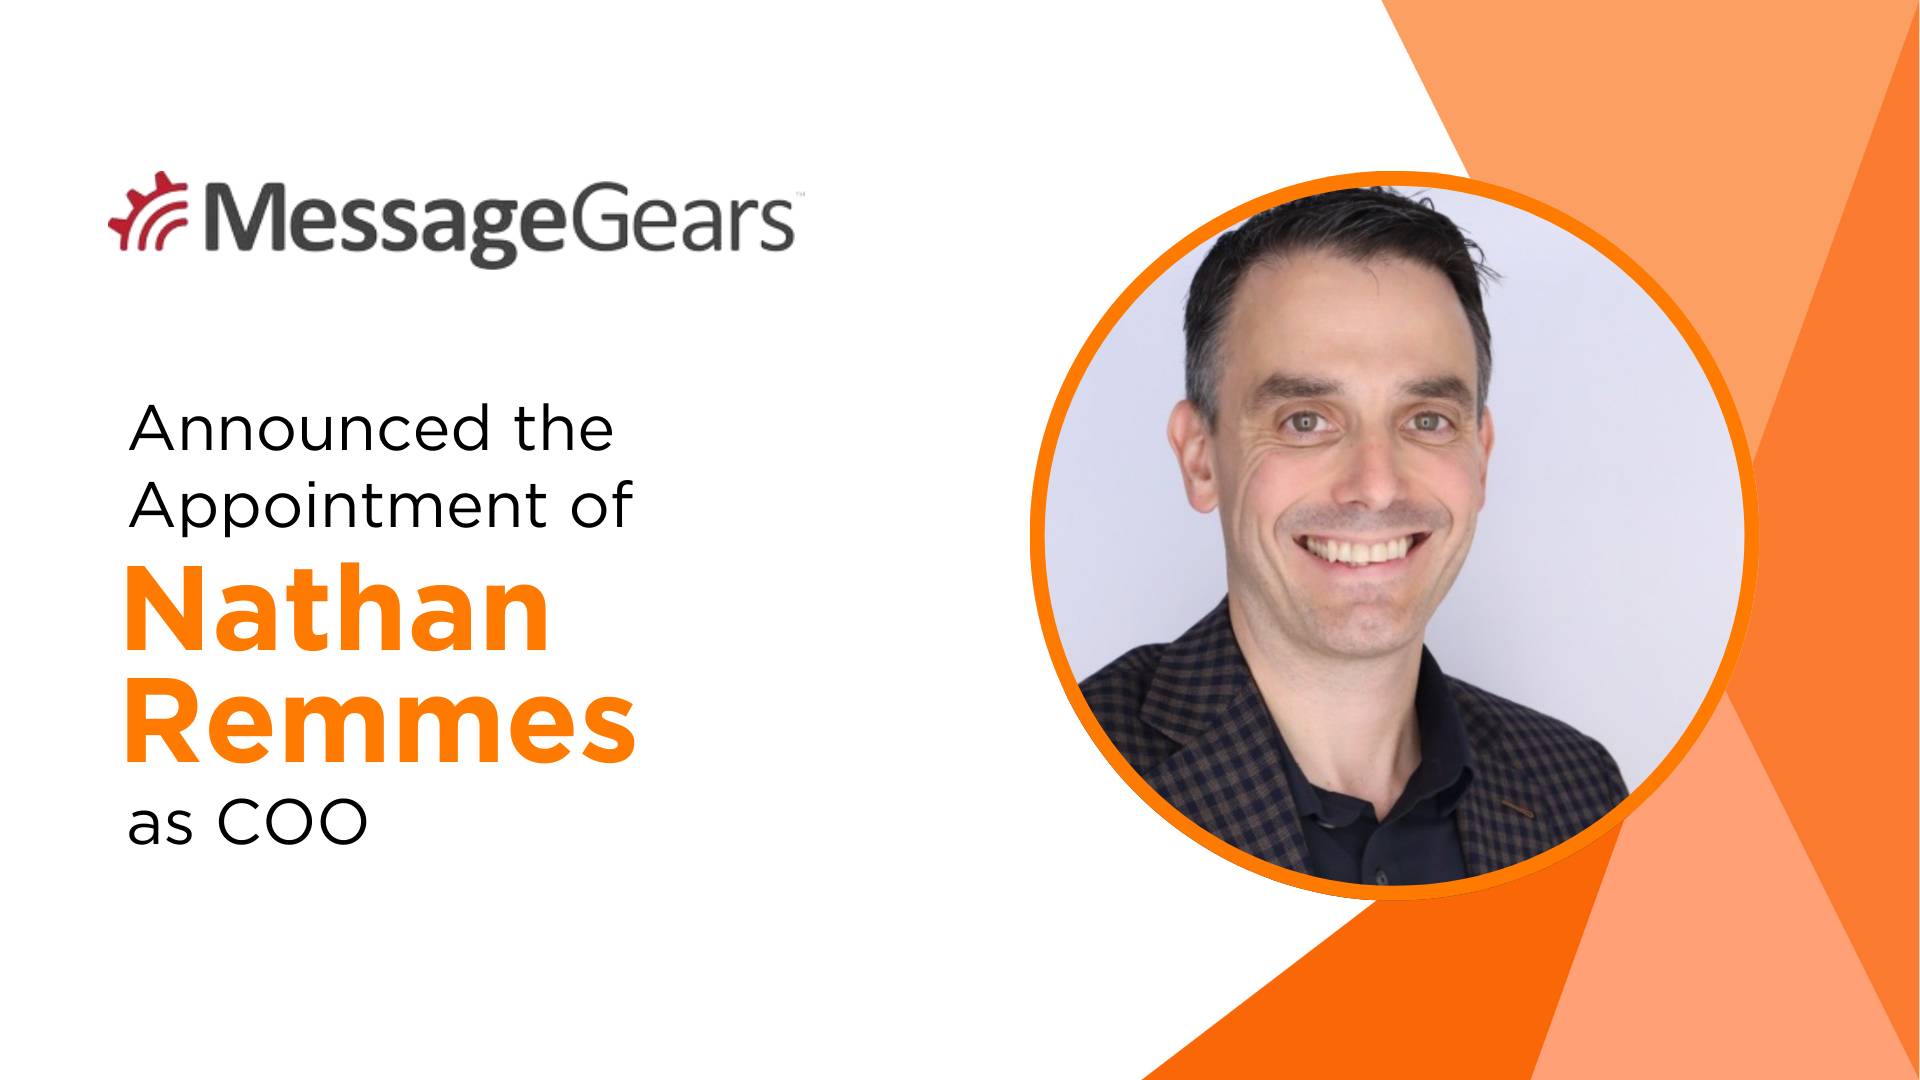 MessageGears Welcomes Nathan Remmes as Chief Operating Officer